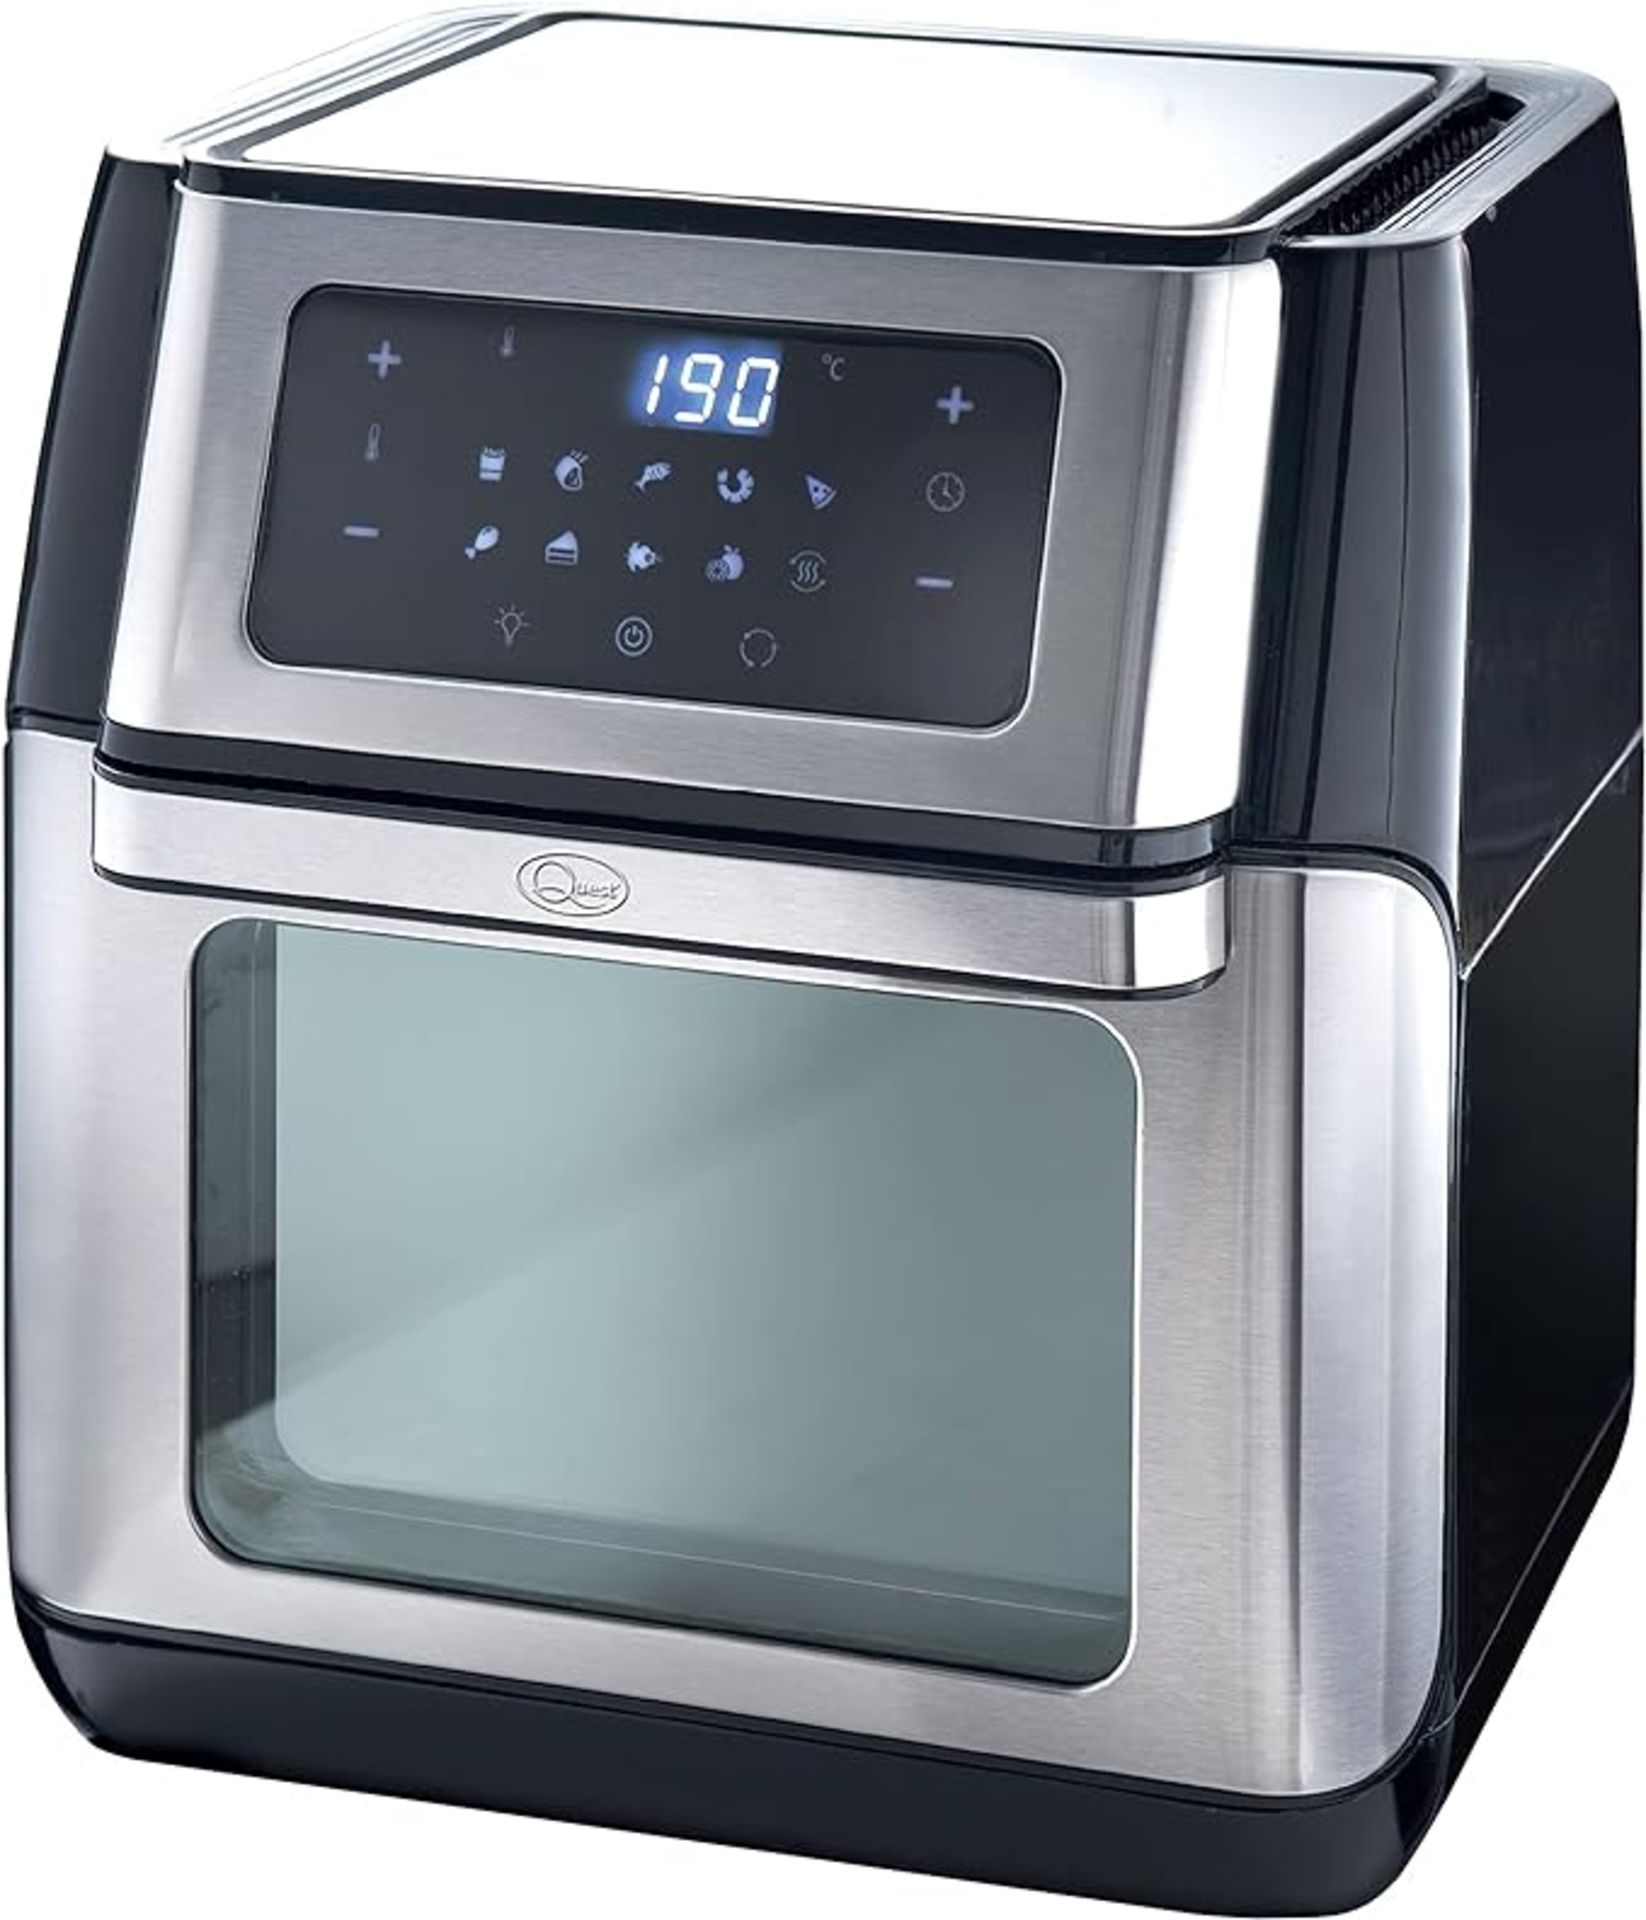 Quest 12L Digital Air Fryer Oven/Large Family Size / 5 in 1/ & 10 Pre-Set Modes / 1500W / Rotisserie